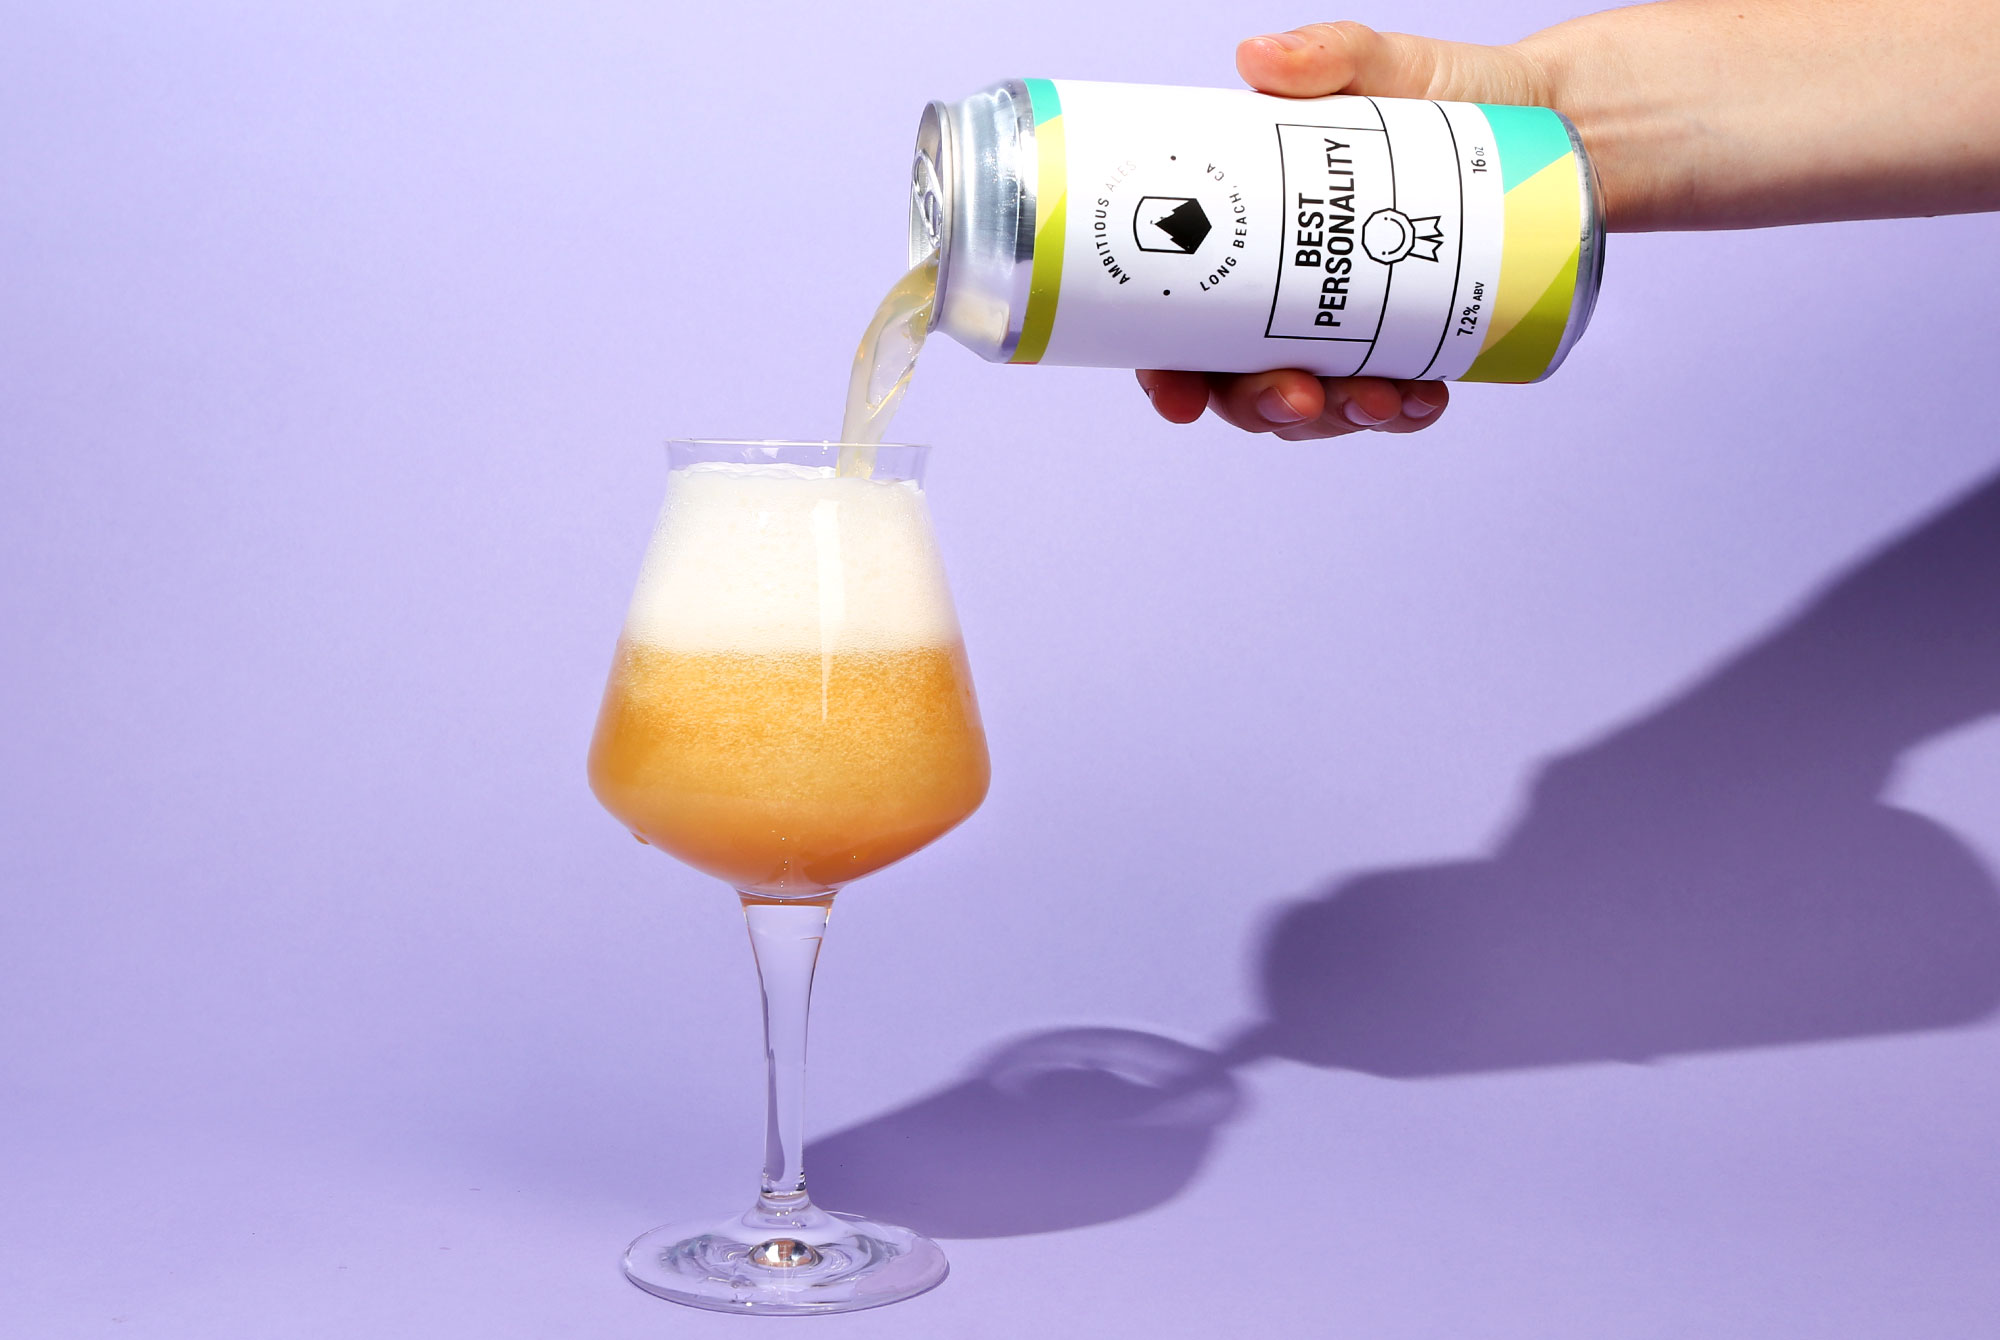 The 20 Most Underrated Breweries of 2020